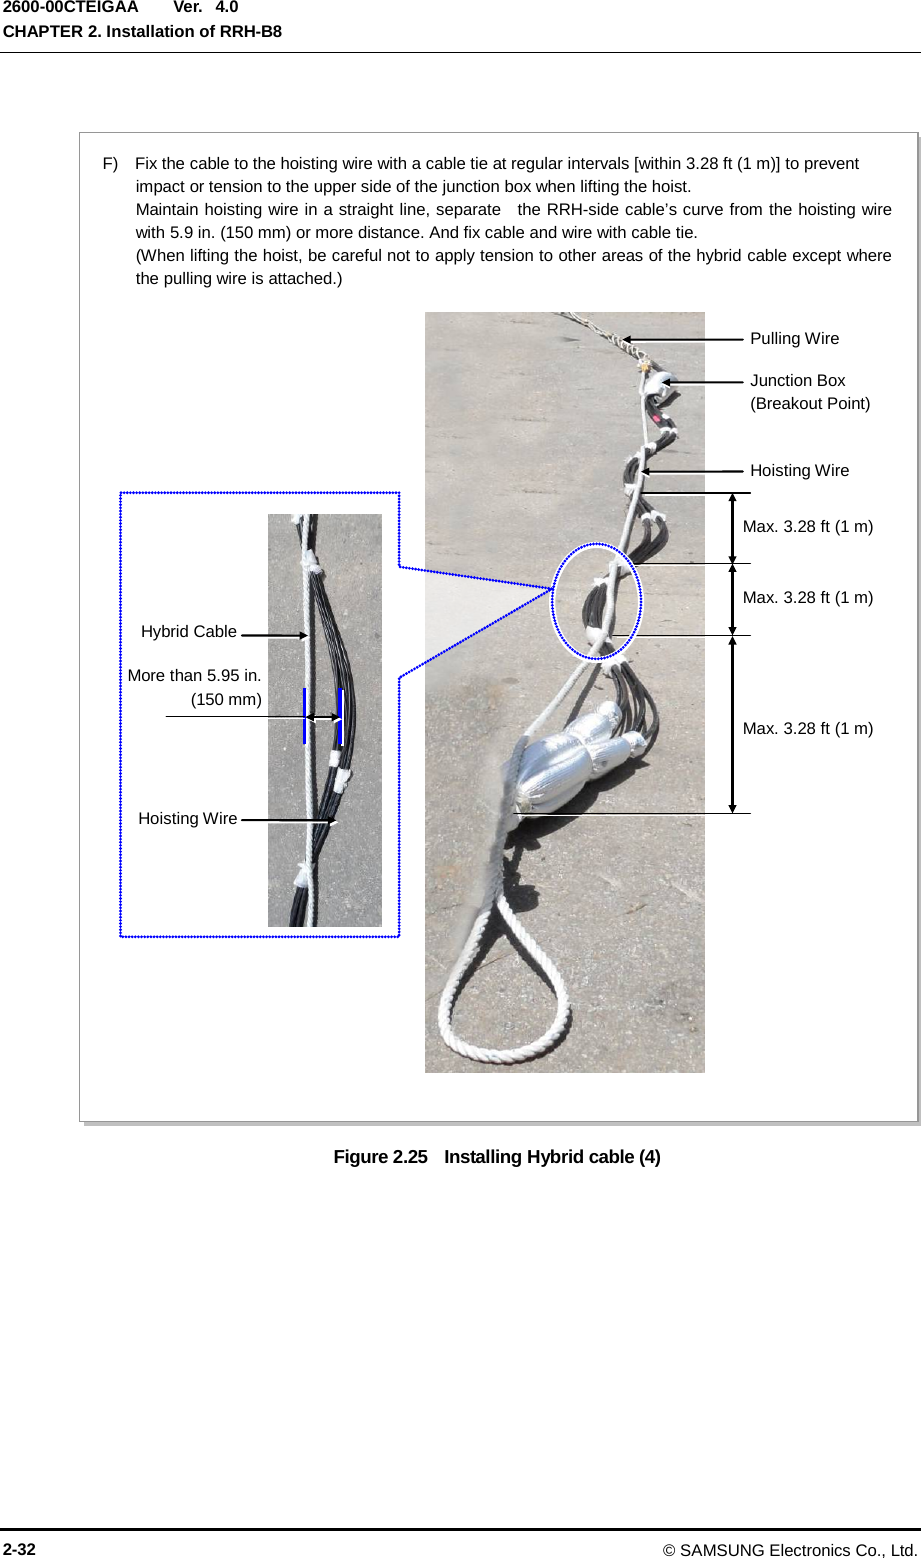  Ver.  CHAPTER 2. Installation of RRH-B8 2600-00CTEIGAA 4.0  Figure 2.25    Installing Hybrid cable (4) F)  Fix the cable to the hoisting wire with a cable tie at regular intervals [within 3.28 ft (1 m)] to prevent impact or tension to the upper side of the junction box when lifting the hoist. Maintain hoisting wire in a straight line, separate   the RRH-side cable’s curve from the hoisting wire with 5.9 in. (150 mm) or more distance. And fix cable and wire with cable tie. (When lifting the hoist, be careful not to apply tension to other areas of the hybrid cable except where the pulling wire is attached.) Max. 3.28 ft (1 m)  Junction Box (Breakout Point)  Pulling Wire Hoisting Wire Max. 3.28 ft (1 m)  Max. 3.28 ft (1 m)   Hoisting Wire Hybrid Cable More than 5.95 in. (150 mm) 2-32 © SAMSUNG Electronics Co., Ltd. 